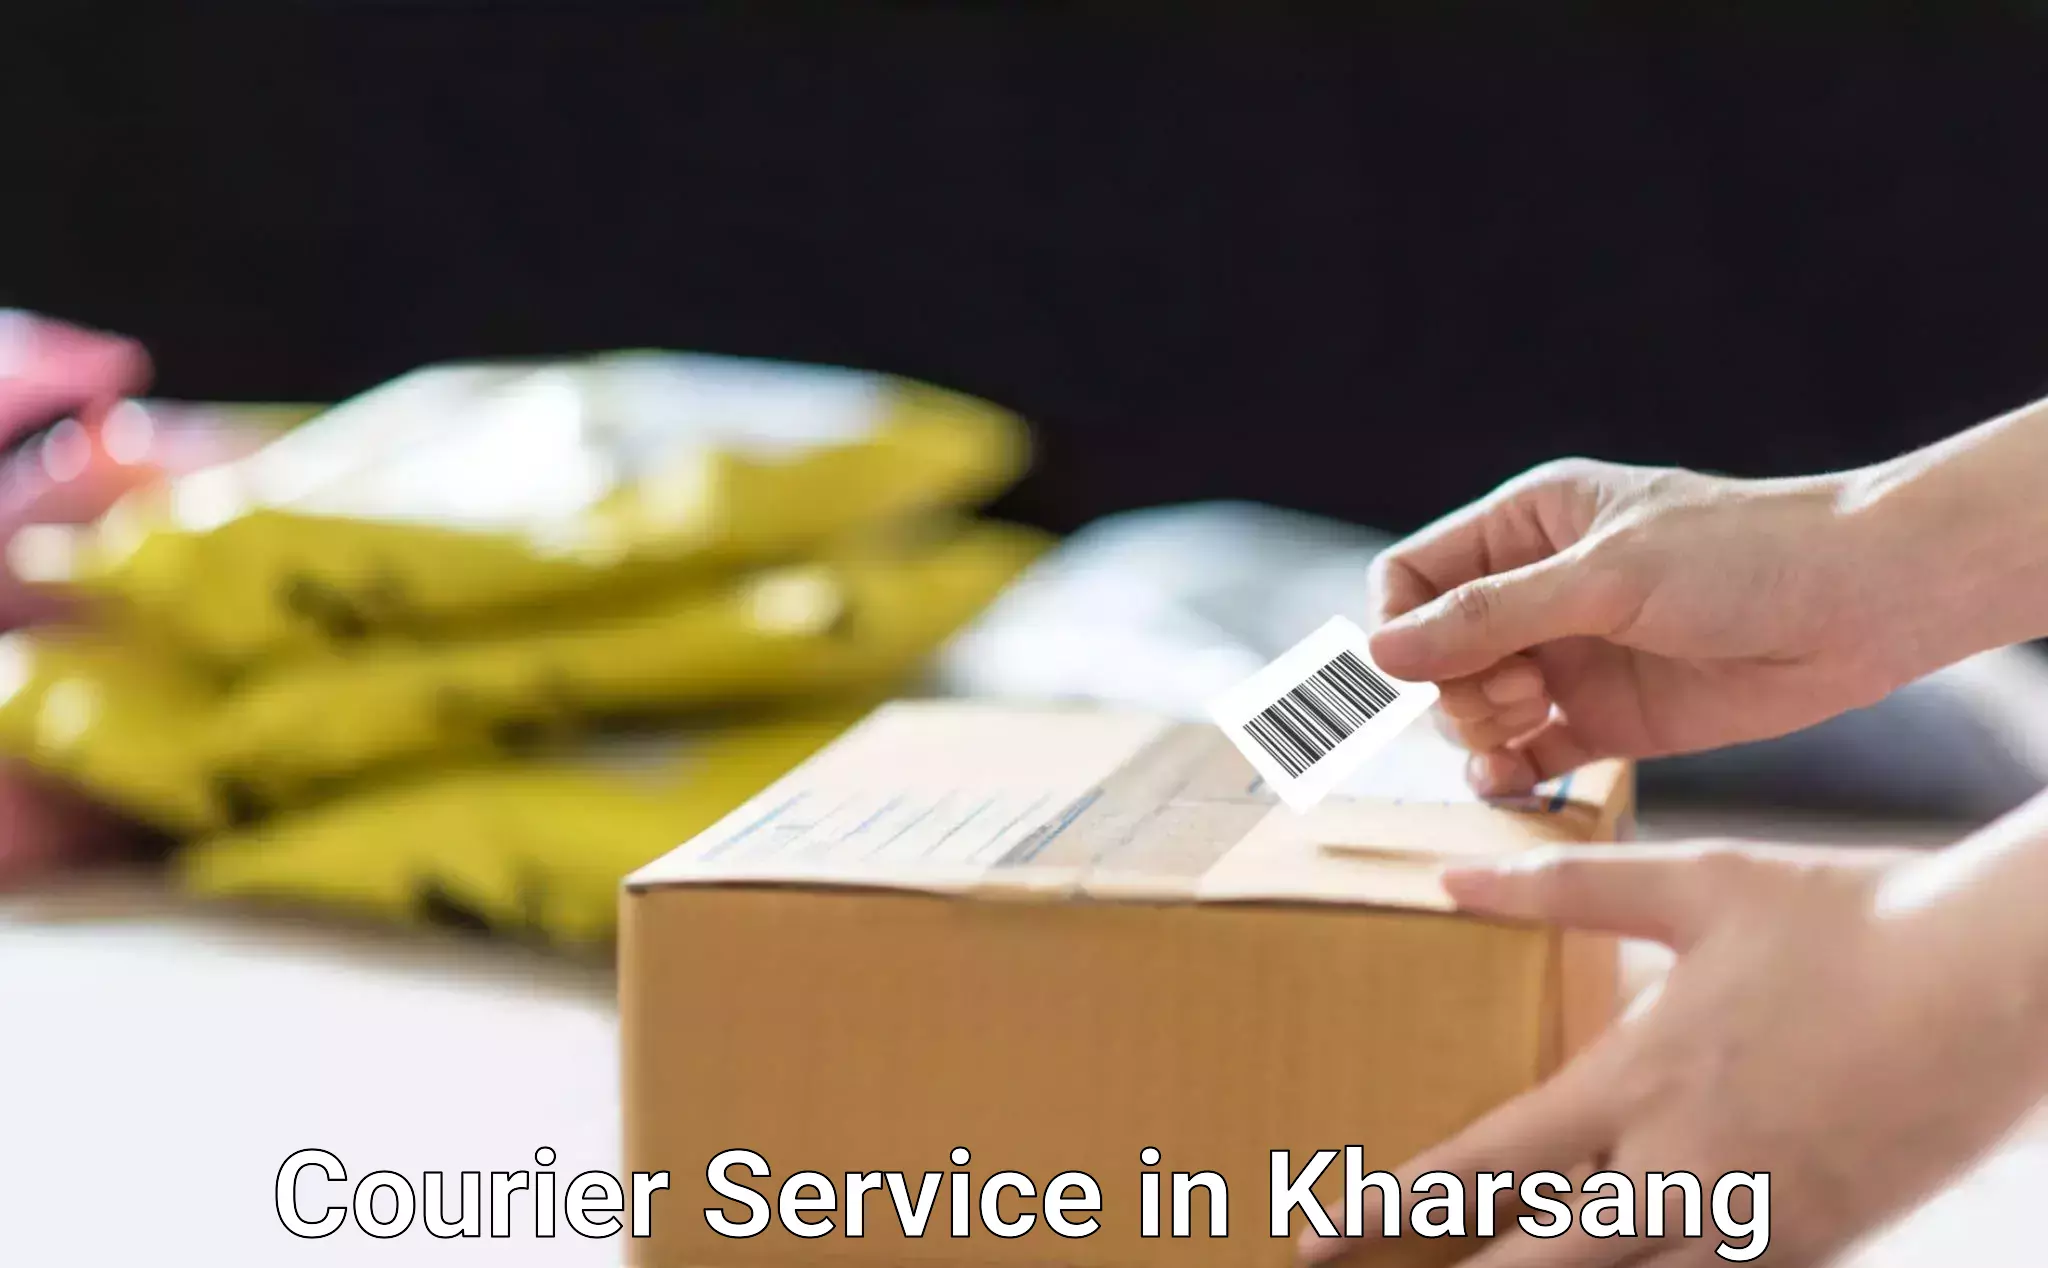 Nationwide shipping coverage in Kharsang